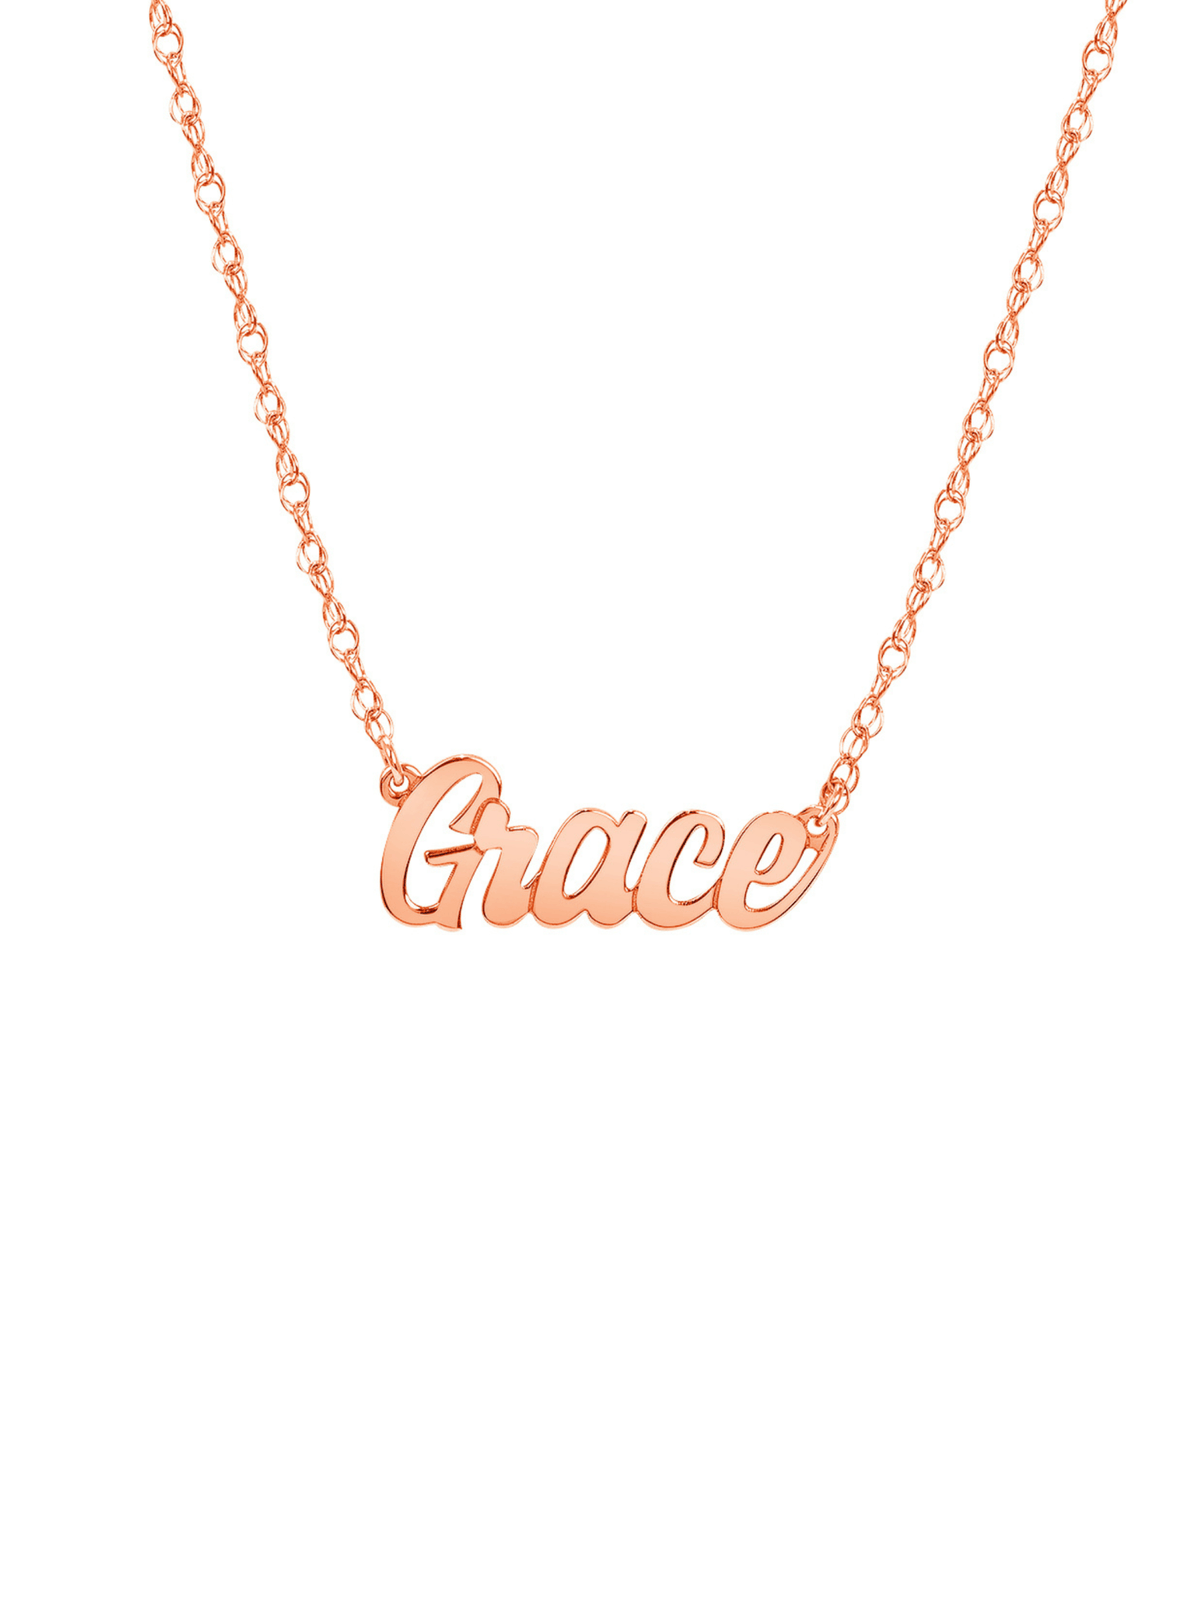 Rose gold necklace with kids name on white background